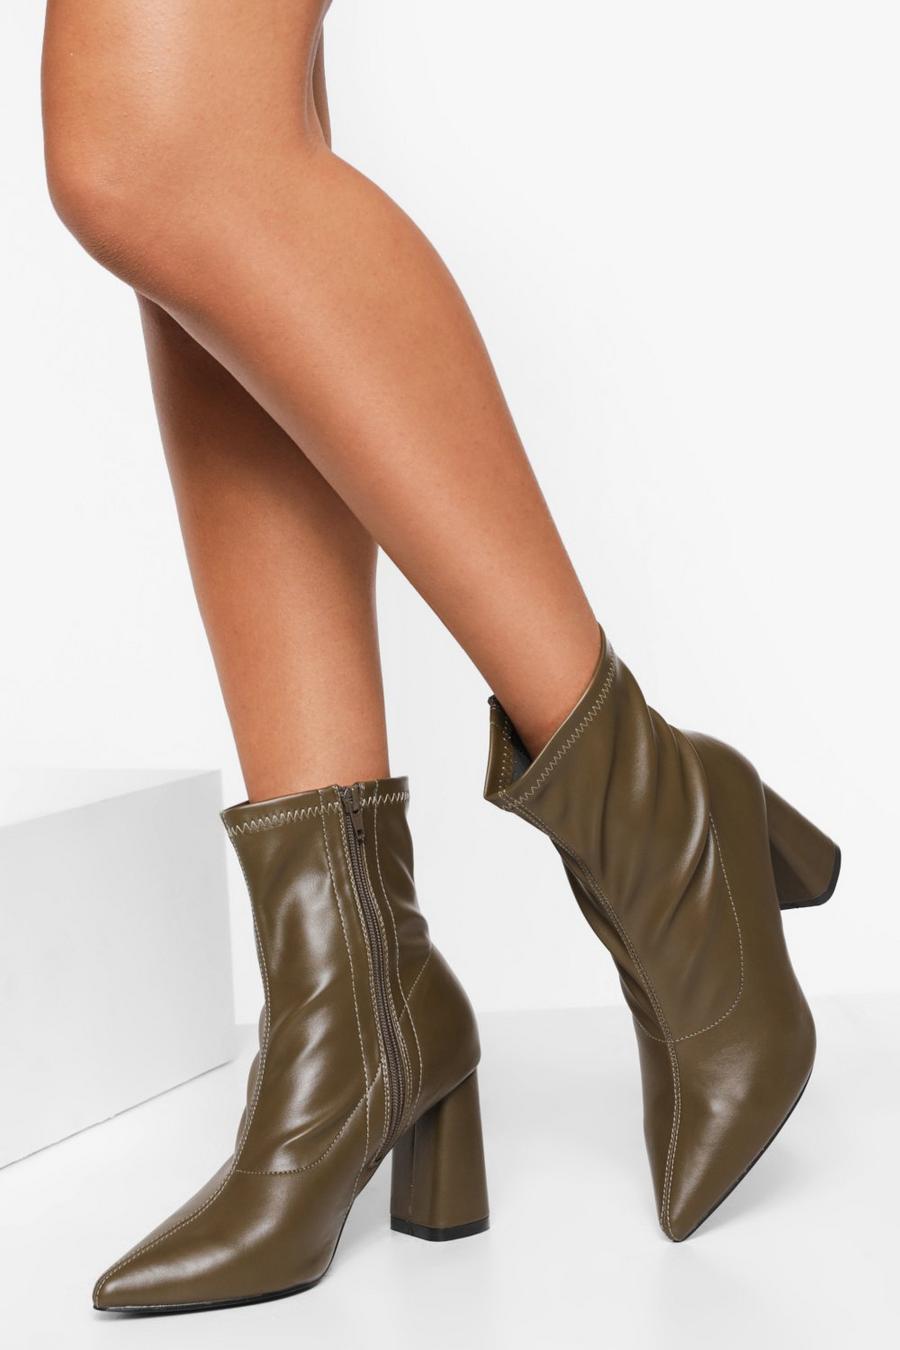 Khaki Pointed Sock Boots